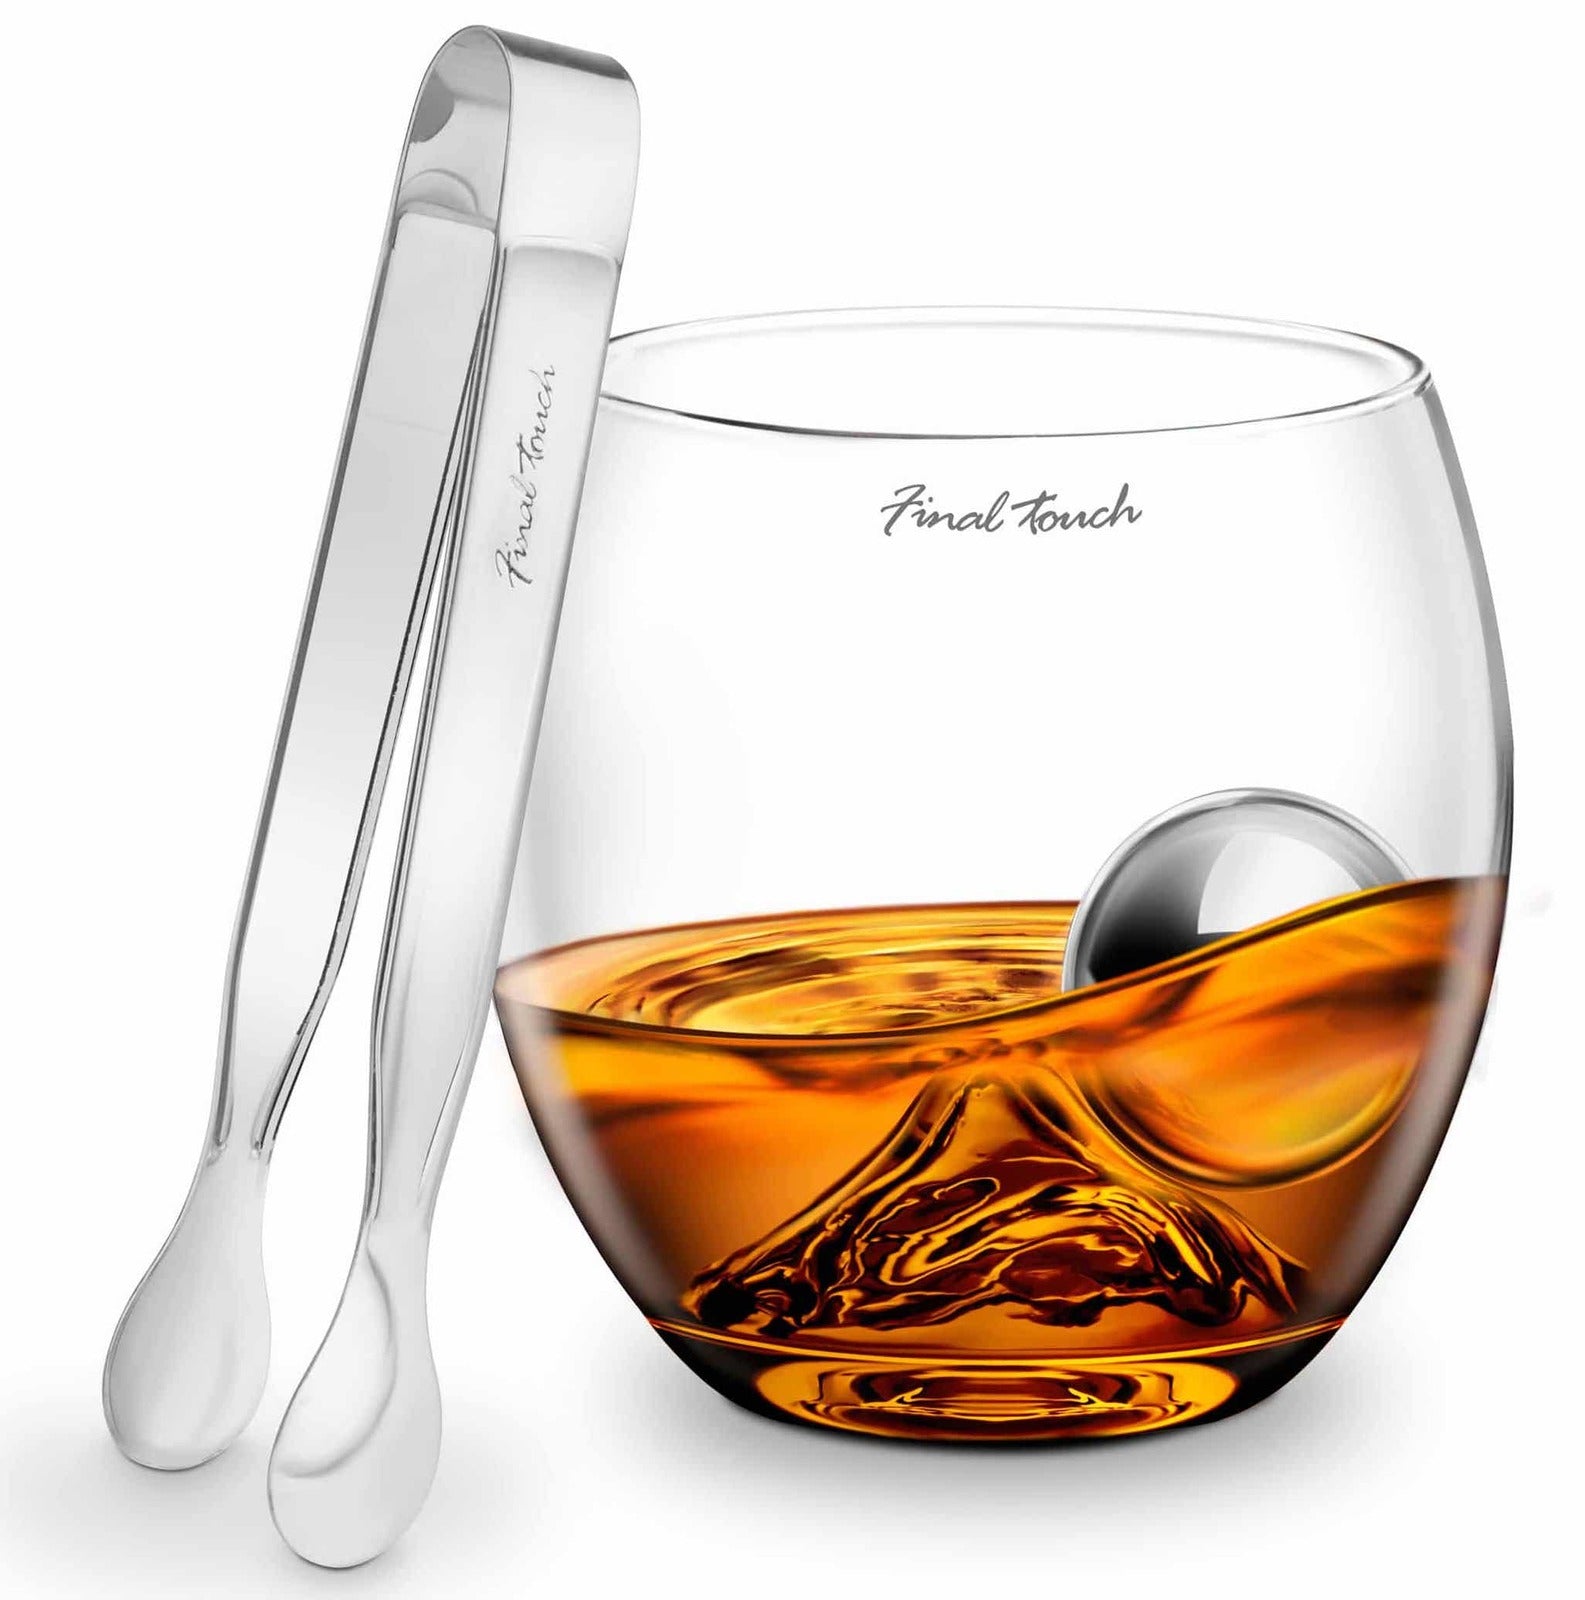 Final Touch: On The Rock Whisky Glass Stainless Steel Ball & Tongs